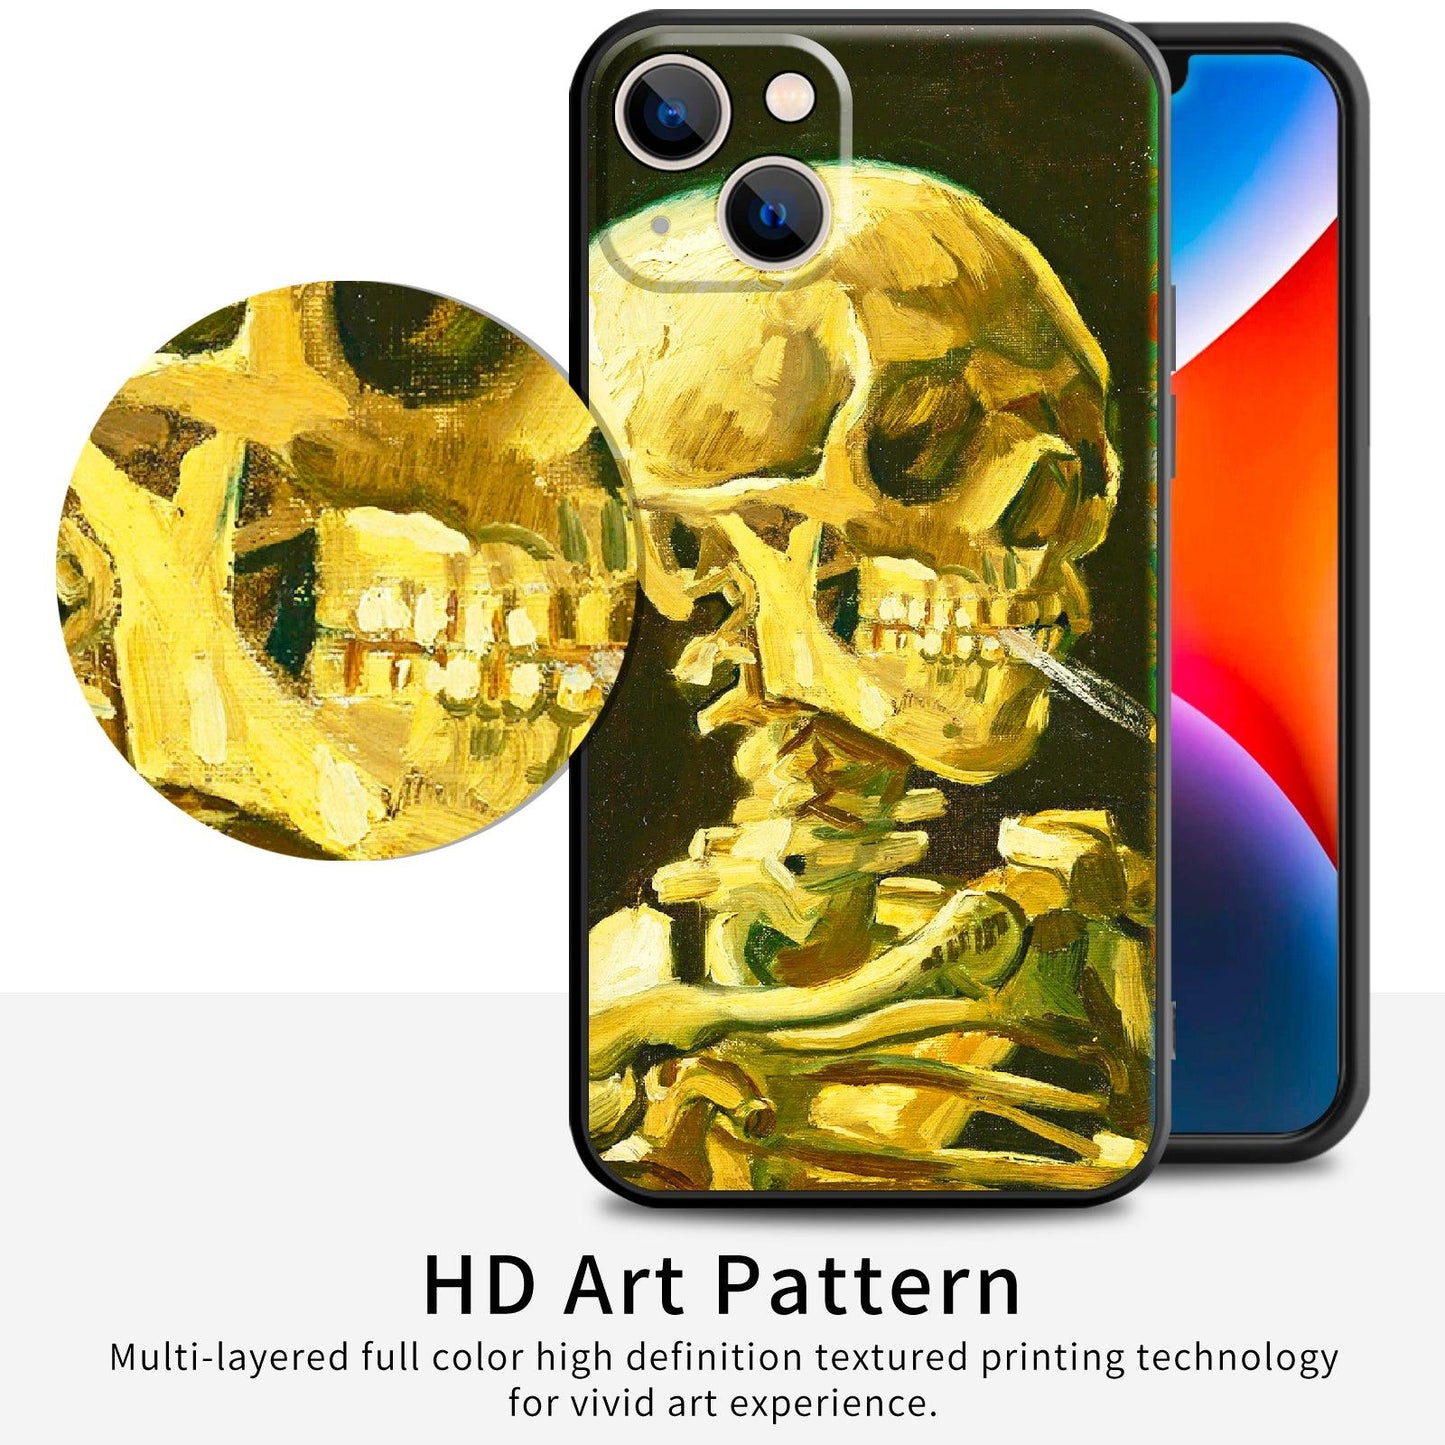 iPhone 14 Silicone Case (Head of a Skeleton with a Burning Cigarette by Vincent Van Gogh) - Berkin Arts